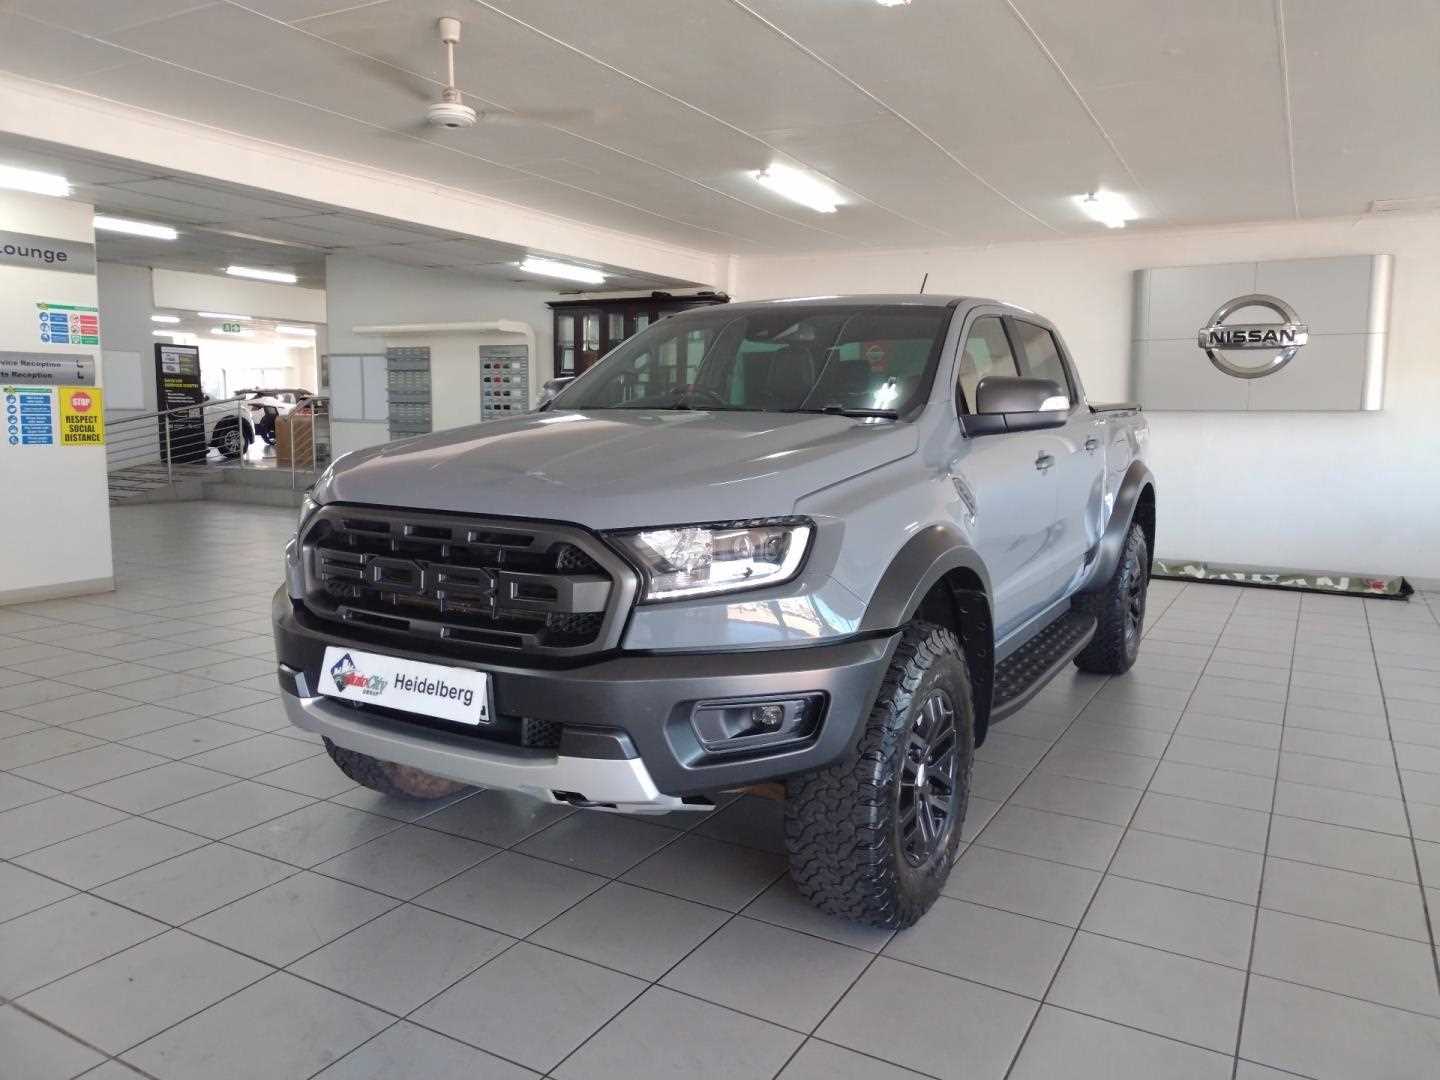 FORD RANGER RAPTOR 2.0D BI-TURBO 4X4 A/T P/U D/C for Sale in South Africa